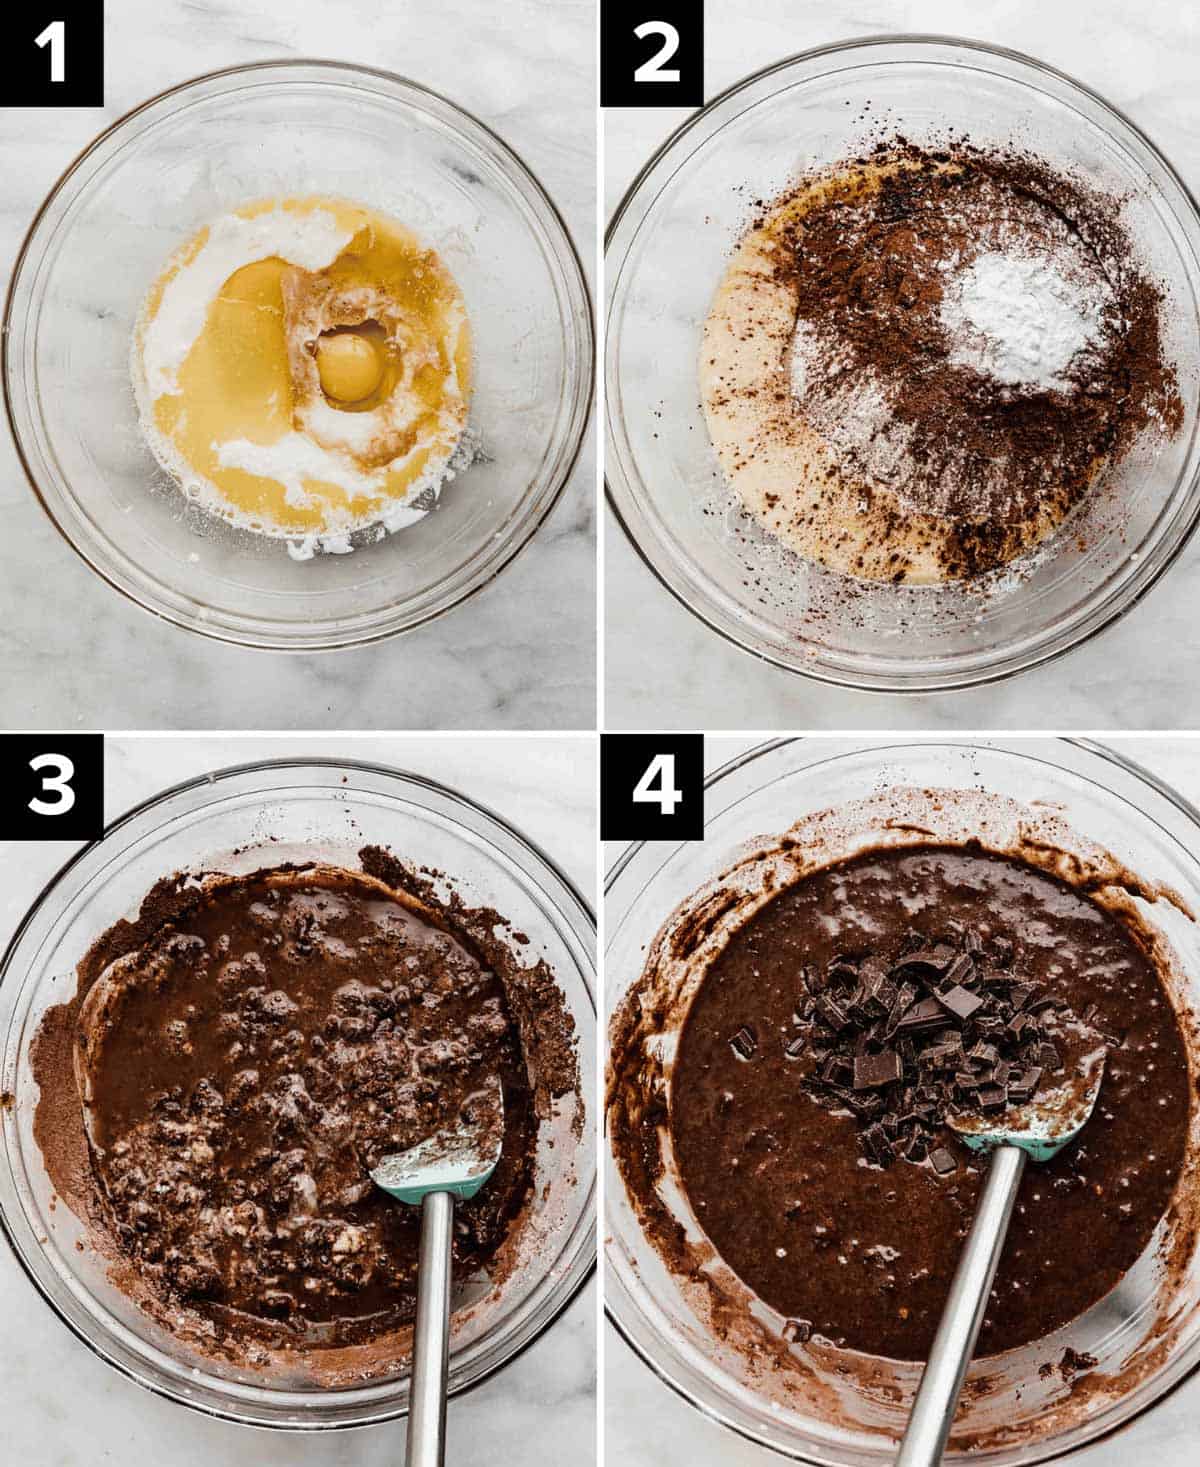 Four images showing how to make Chocolate Tres Leches cake batter using a glass bowl on a white marble background: wet ingredients, dry ingredients, and then the mixing of the brown batter.